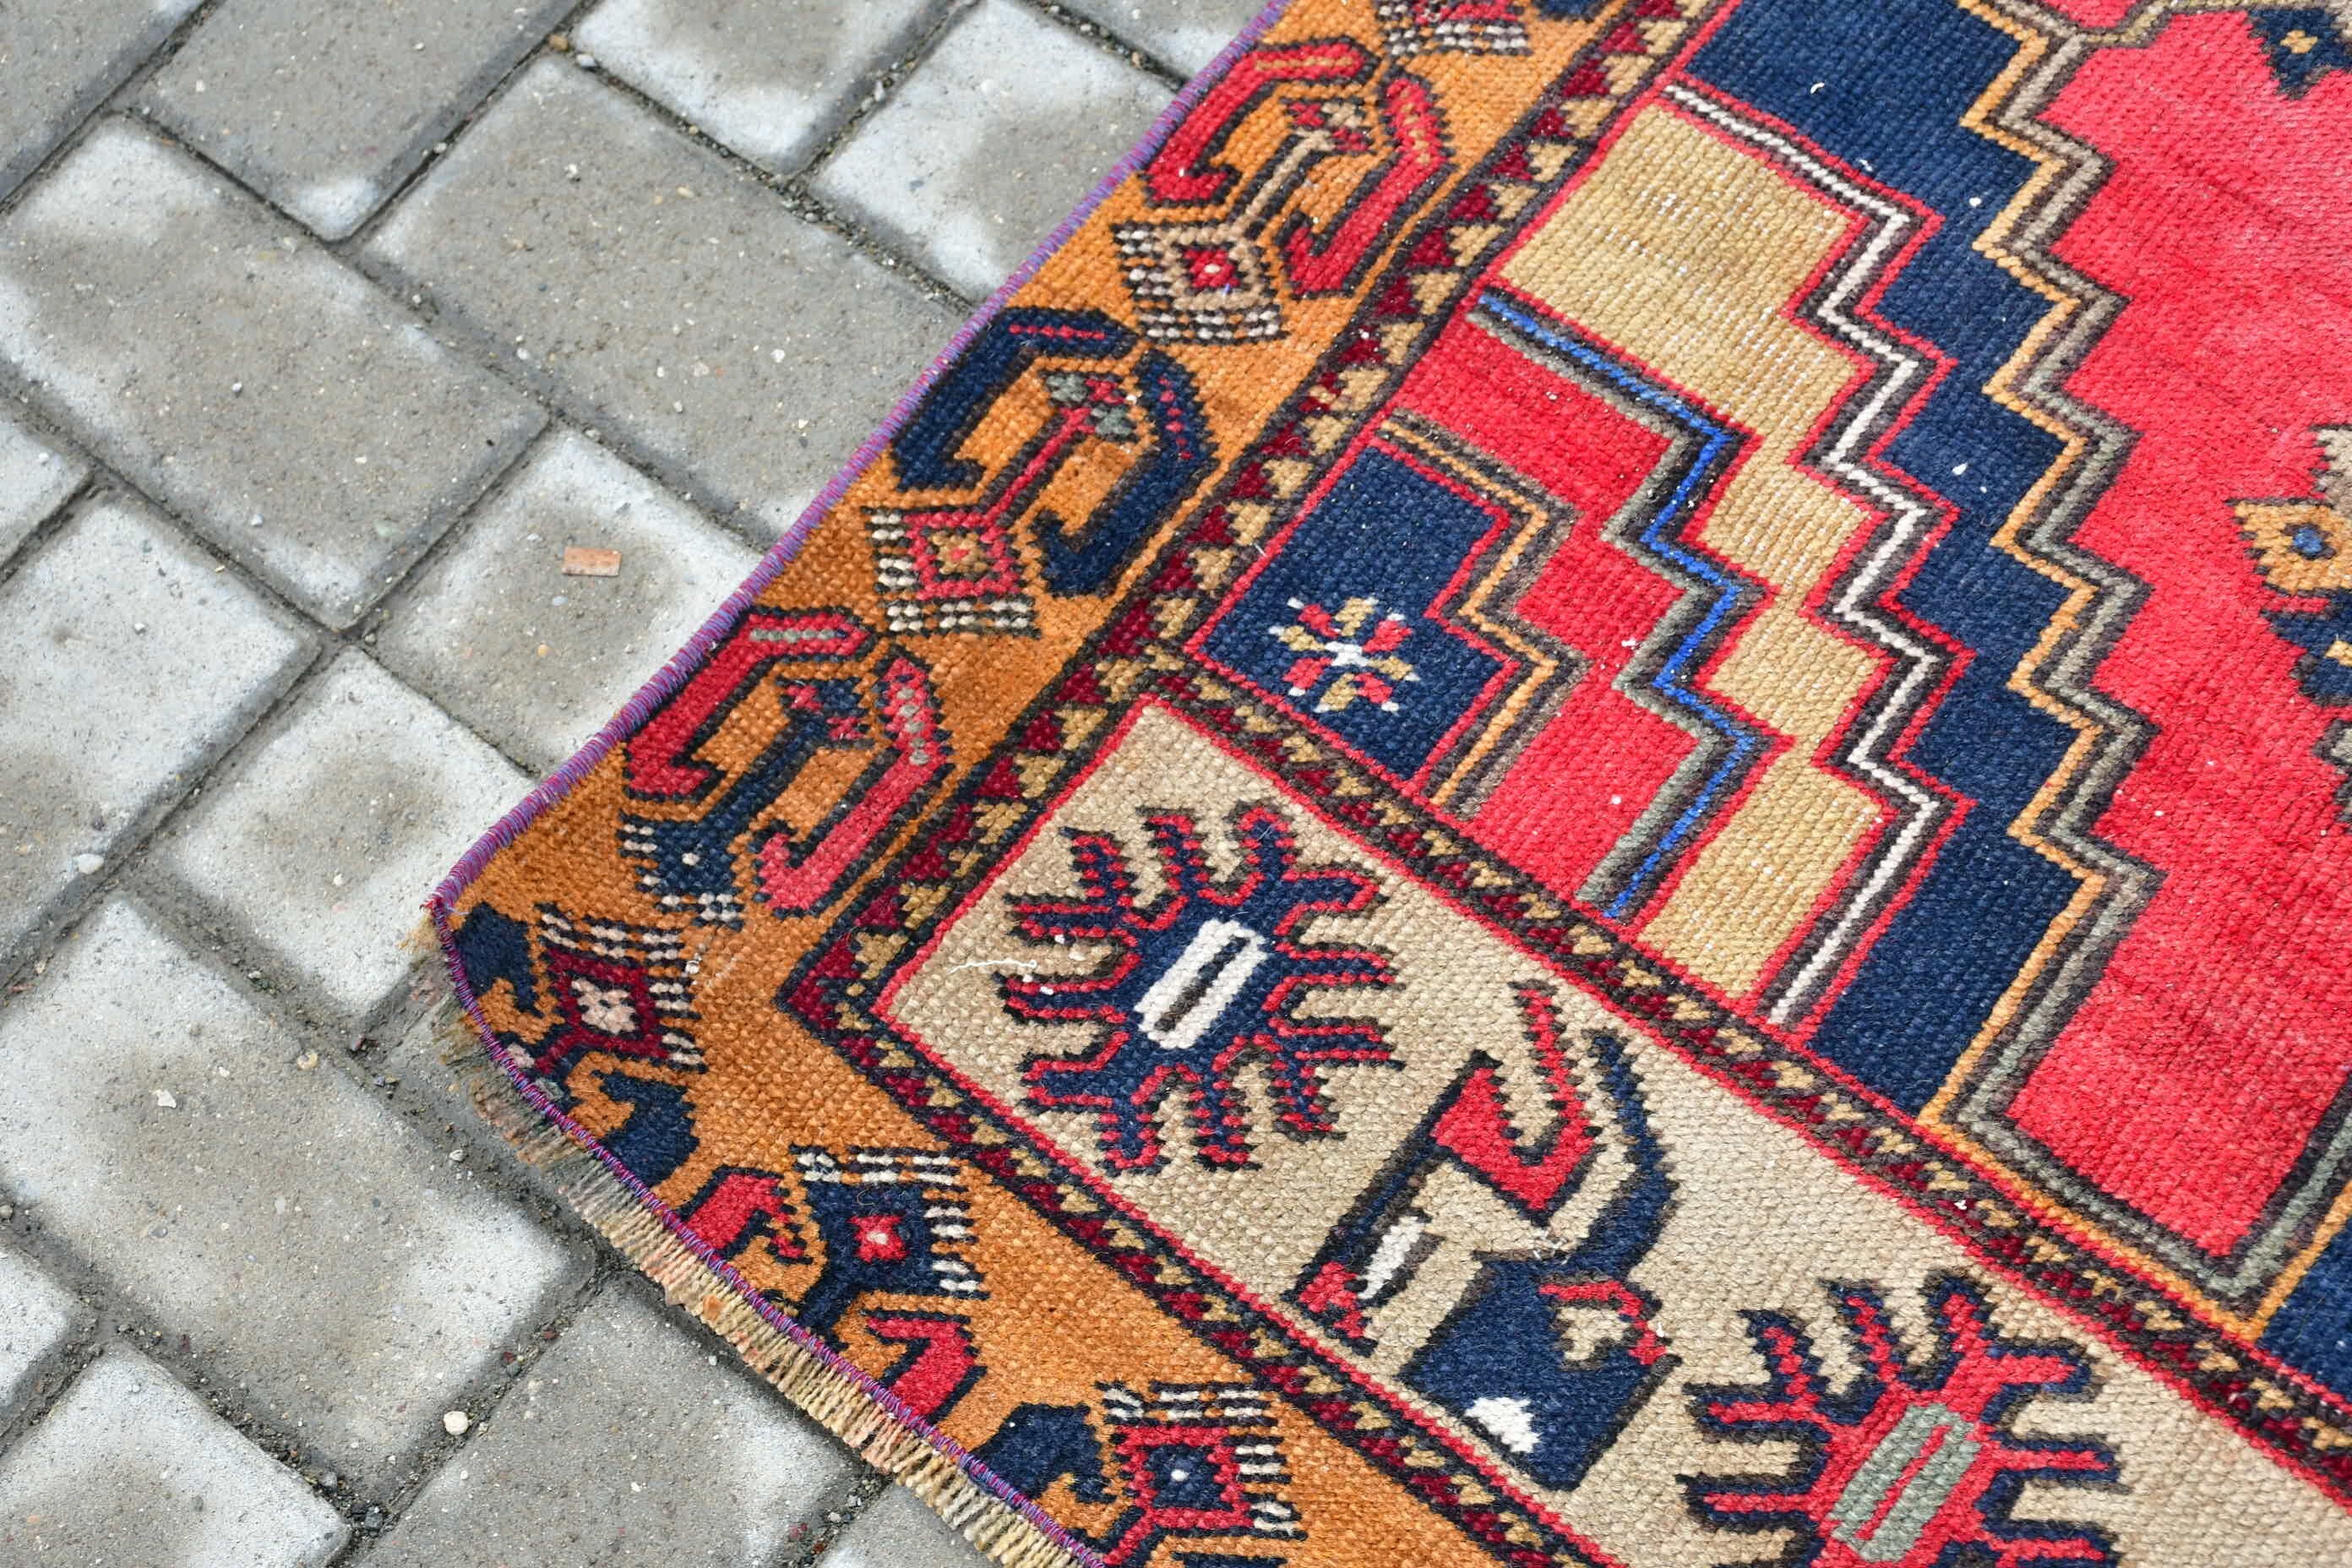 Kitchen Rugs, Nursery Rug, Wool Rug, Red Oushak Rug, Turkish Rug, Rugs for Entry, 2.9x6.1 ft Accent Rugs, Vintage Rug